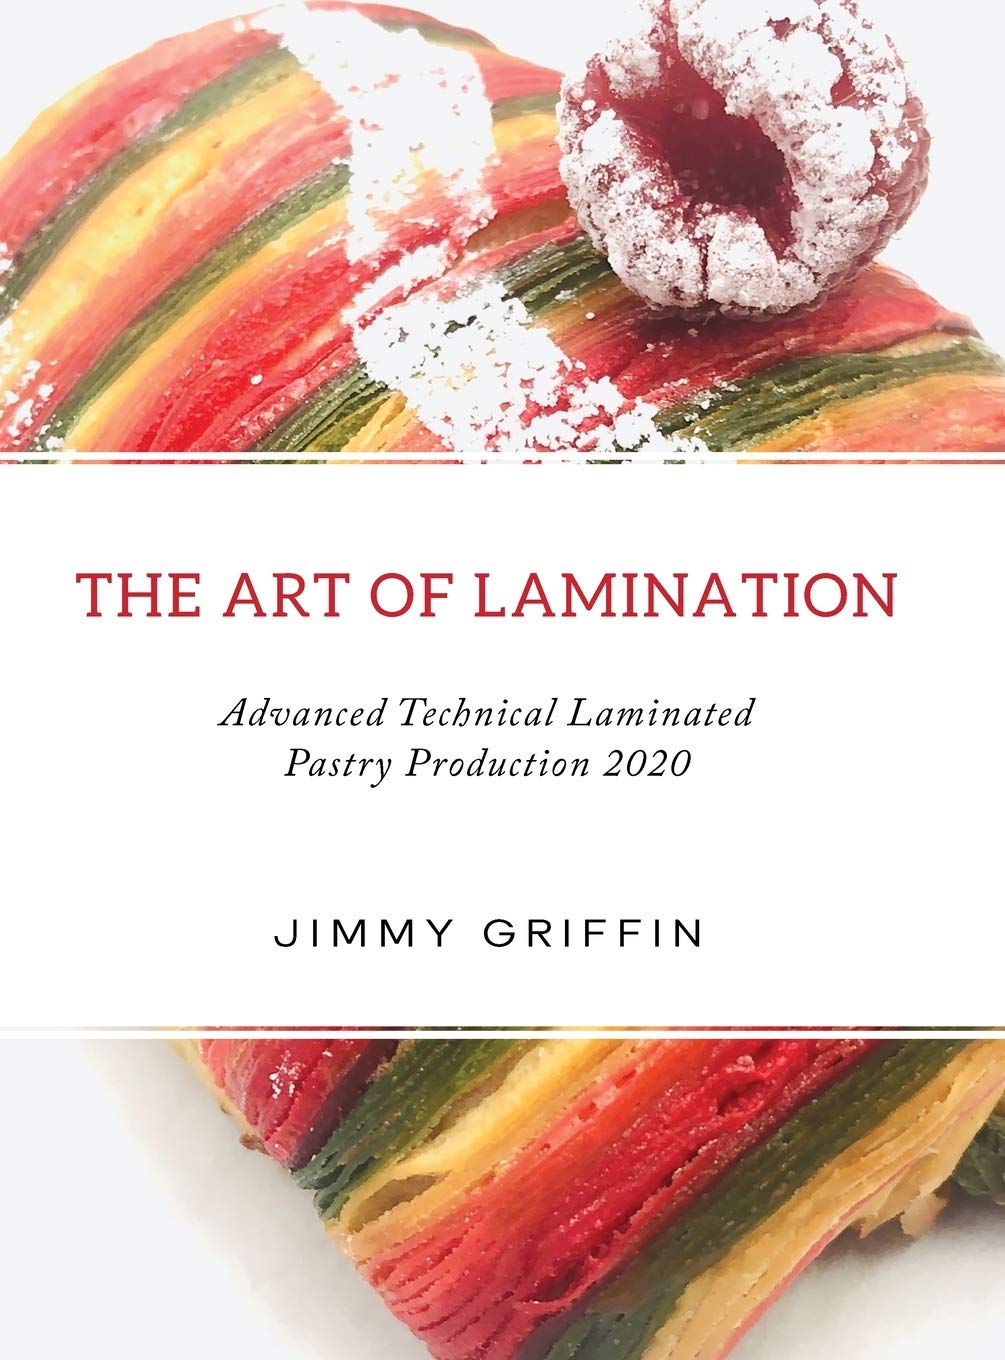 JIMMY GRIFFIN THE ART OF LAMINATION